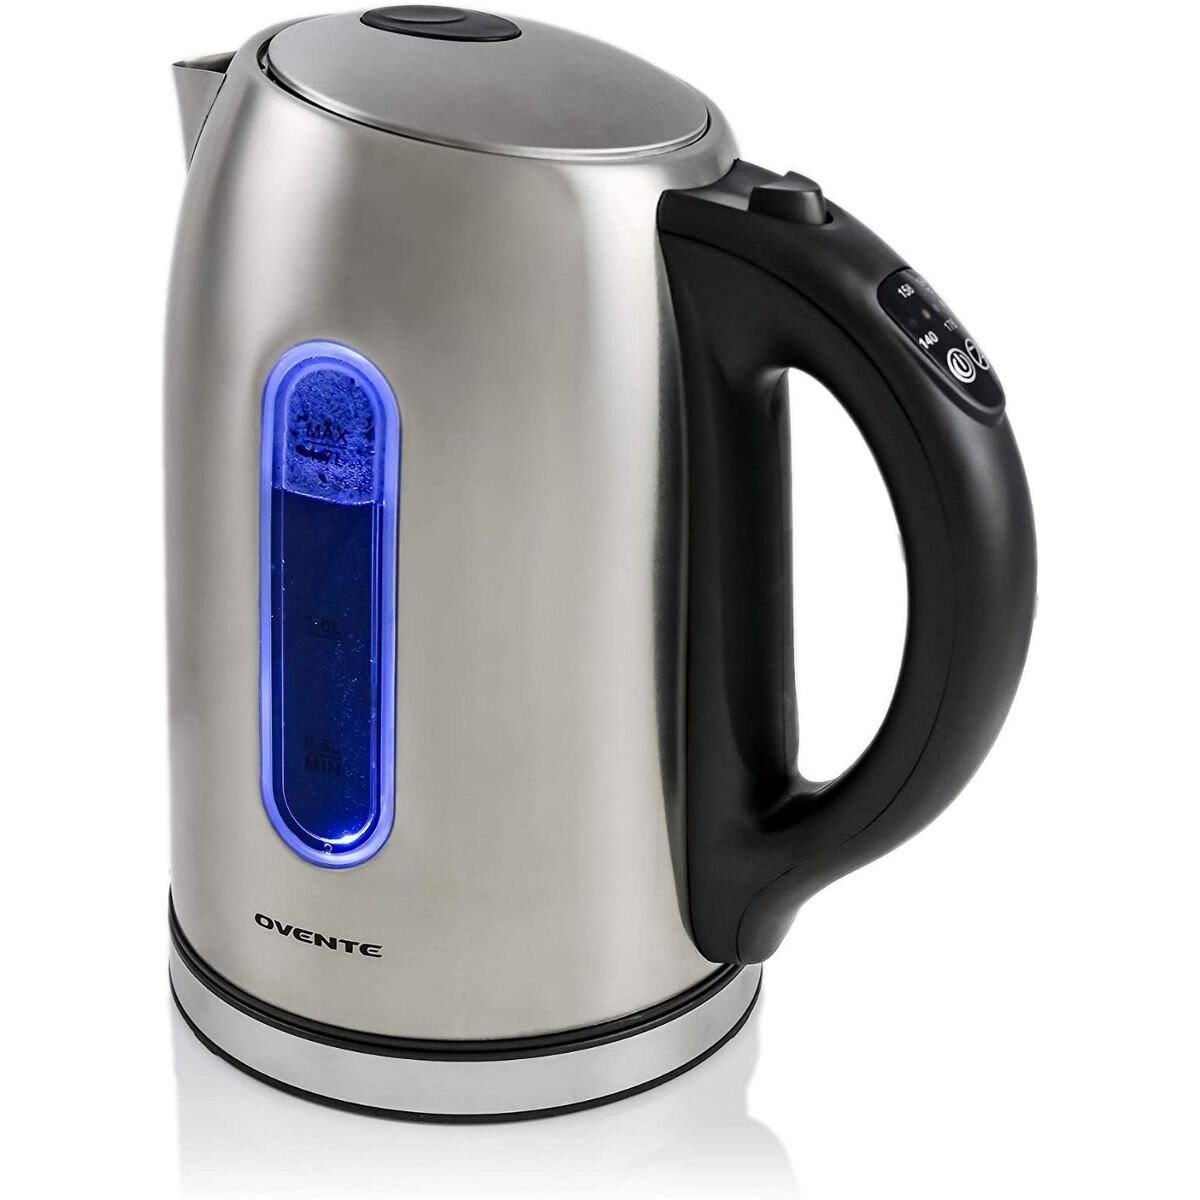 Aroma AWK-701 16-in-1 electric kettle / electric tea maker review / Aroma  Professional AWK-701 